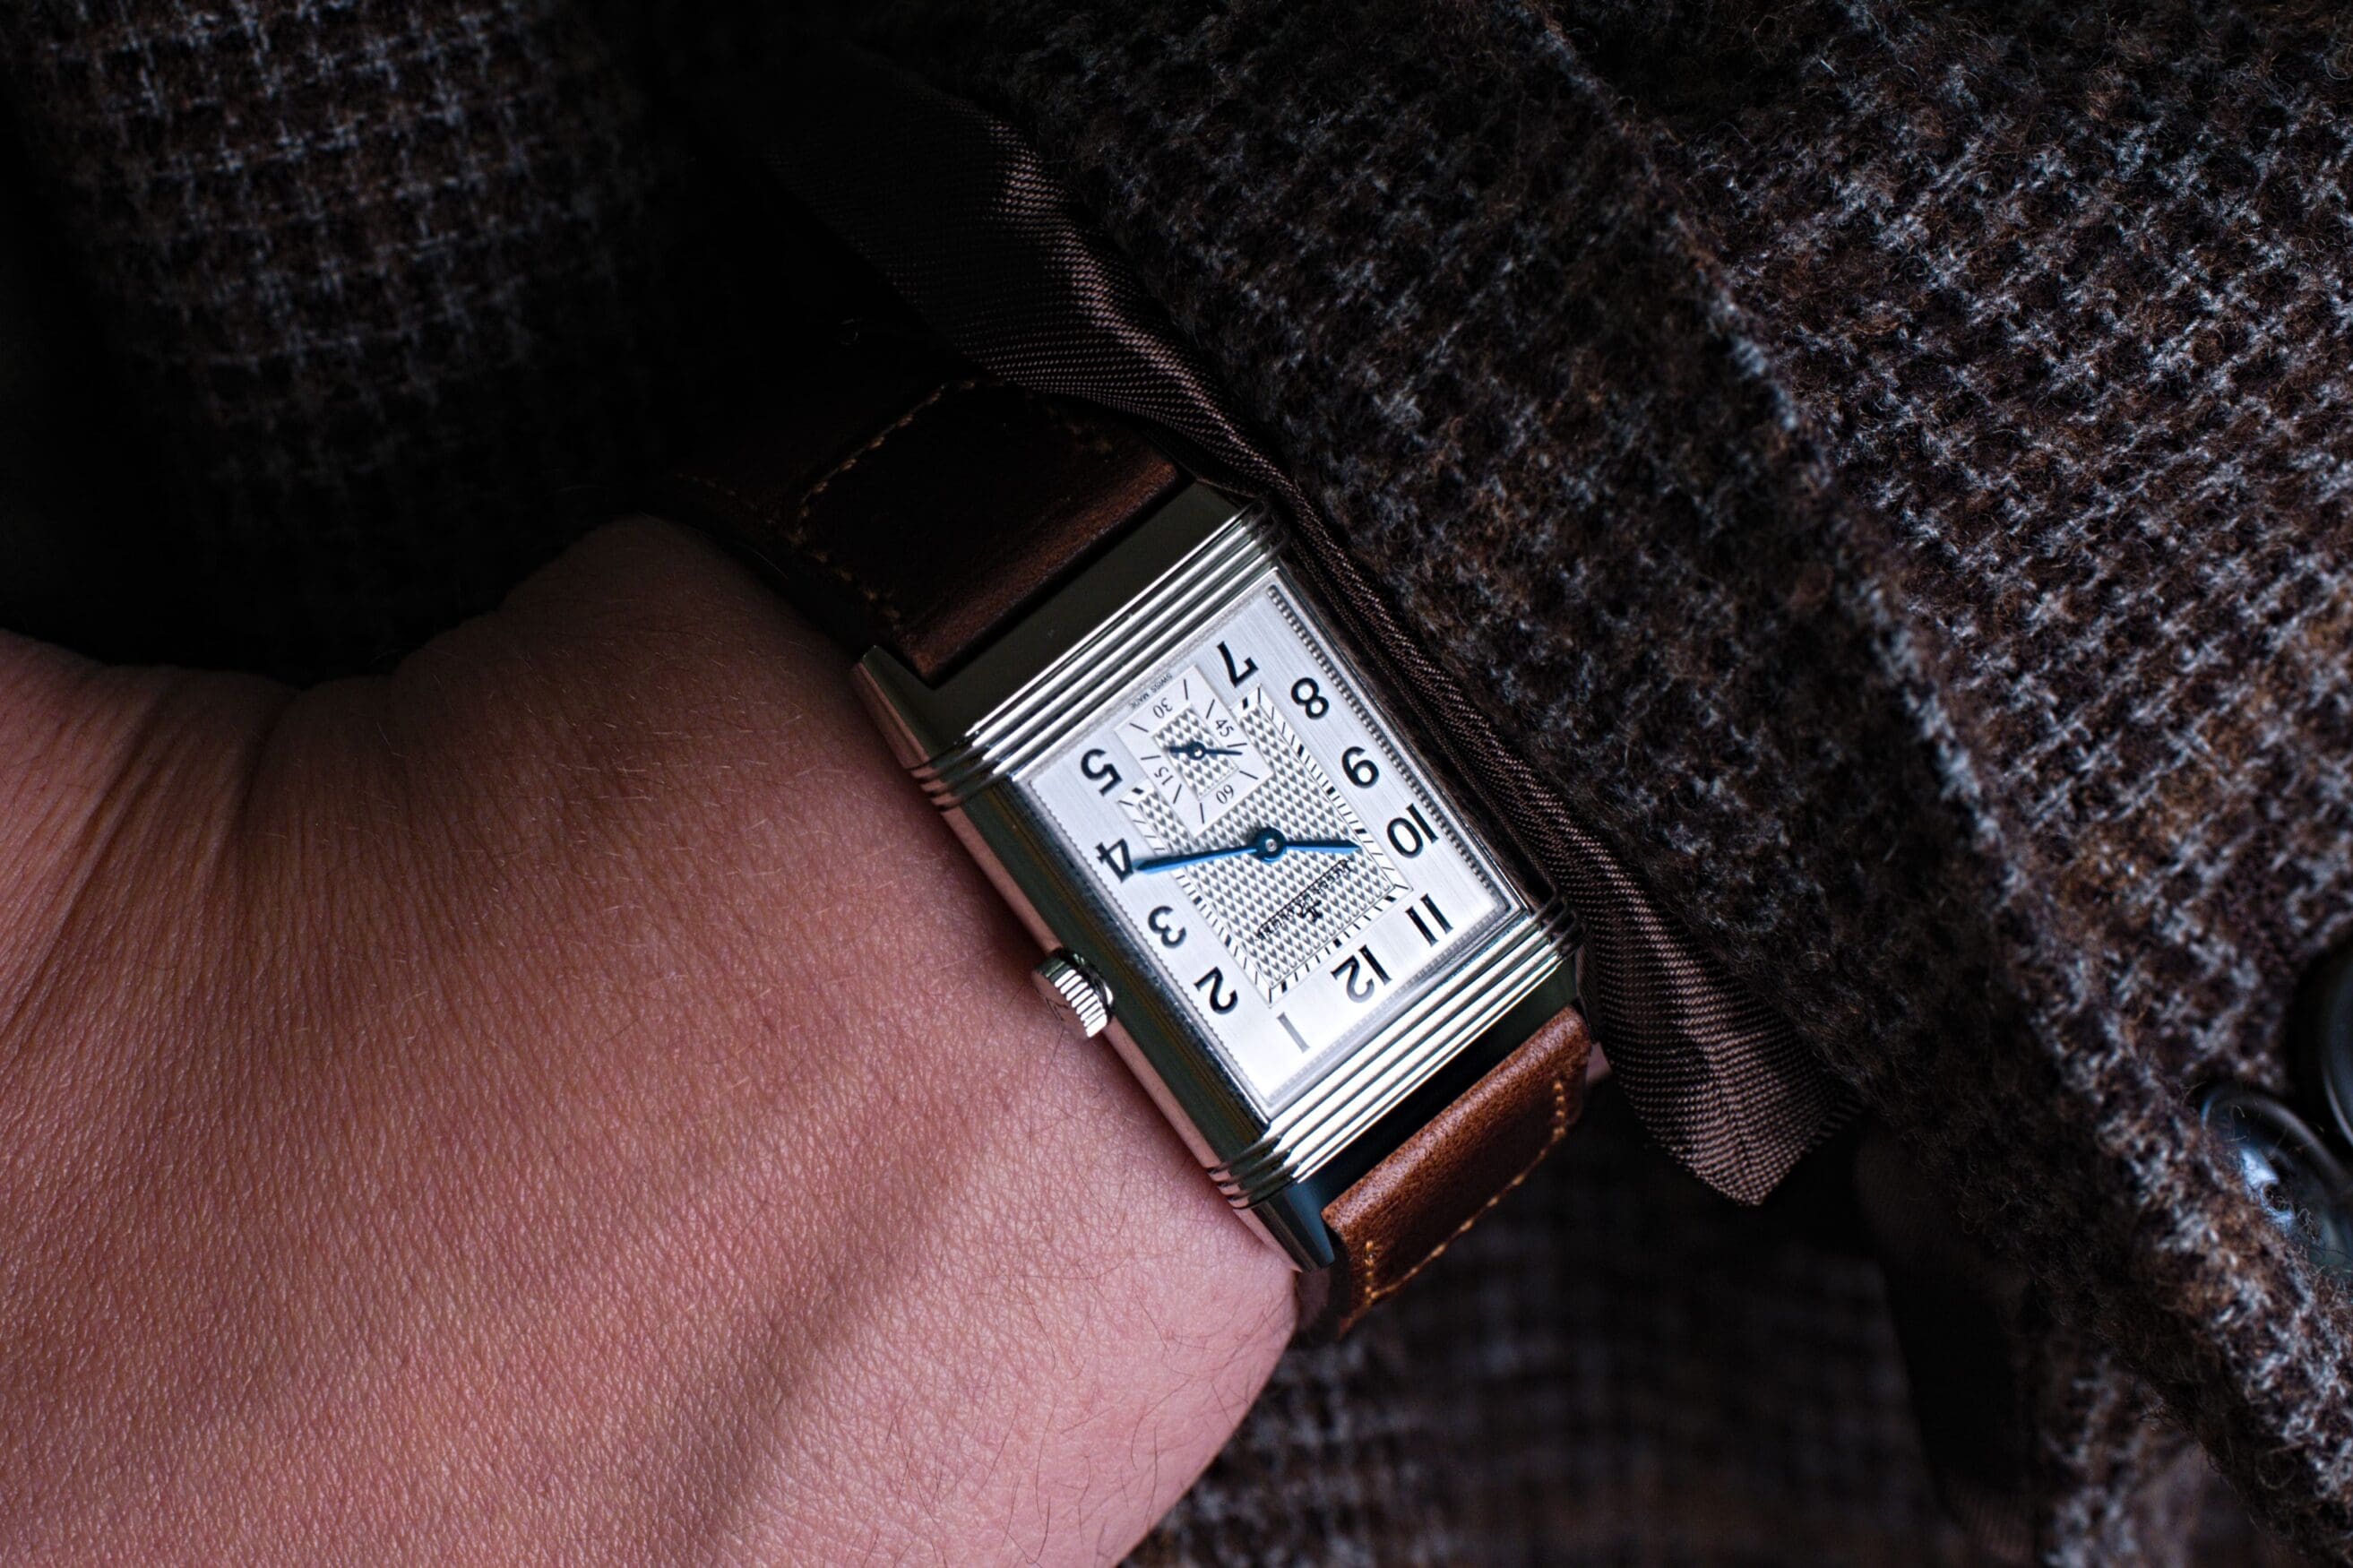 Dressing down a Reverso is easier than you’d think